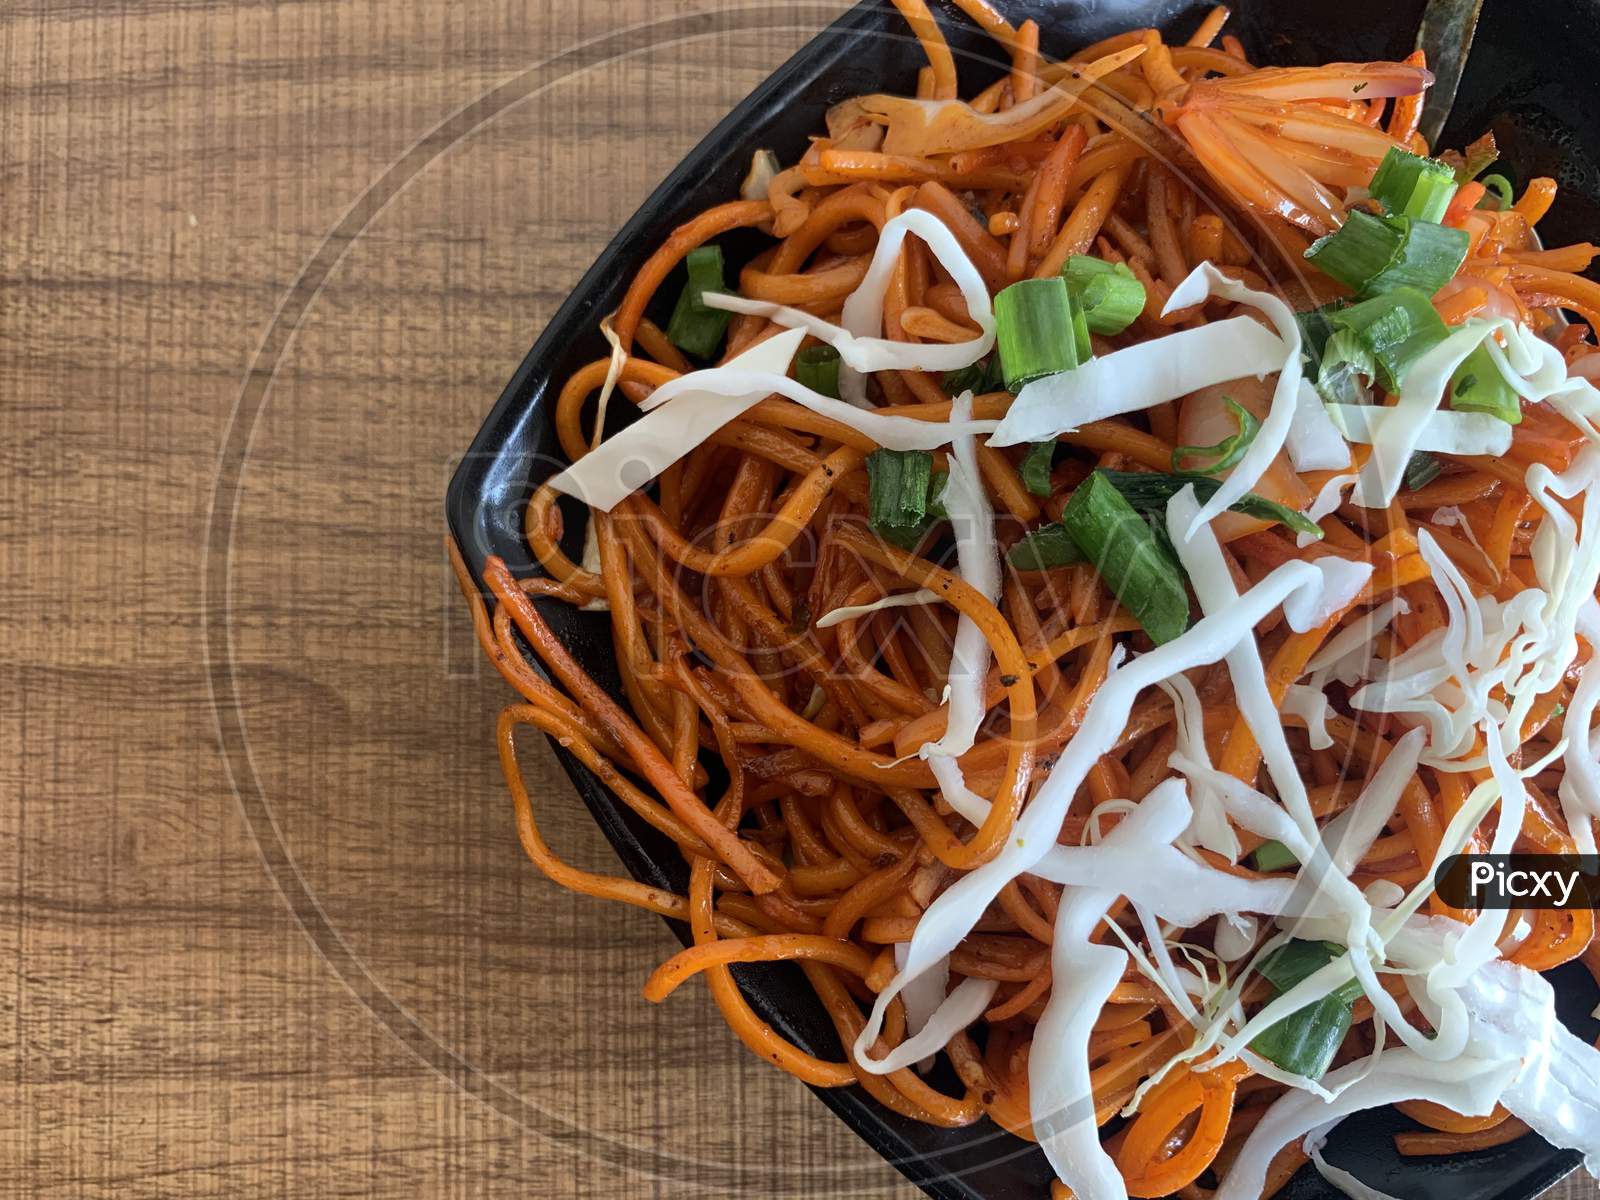 Vegetarian Schezwan Noodles or Vegetable Hakka Noodles or Chow Mein in bowl. Schezwan Noodles is indo-chinese cuisine hot dish with noodles, vegetables and chilli sauce